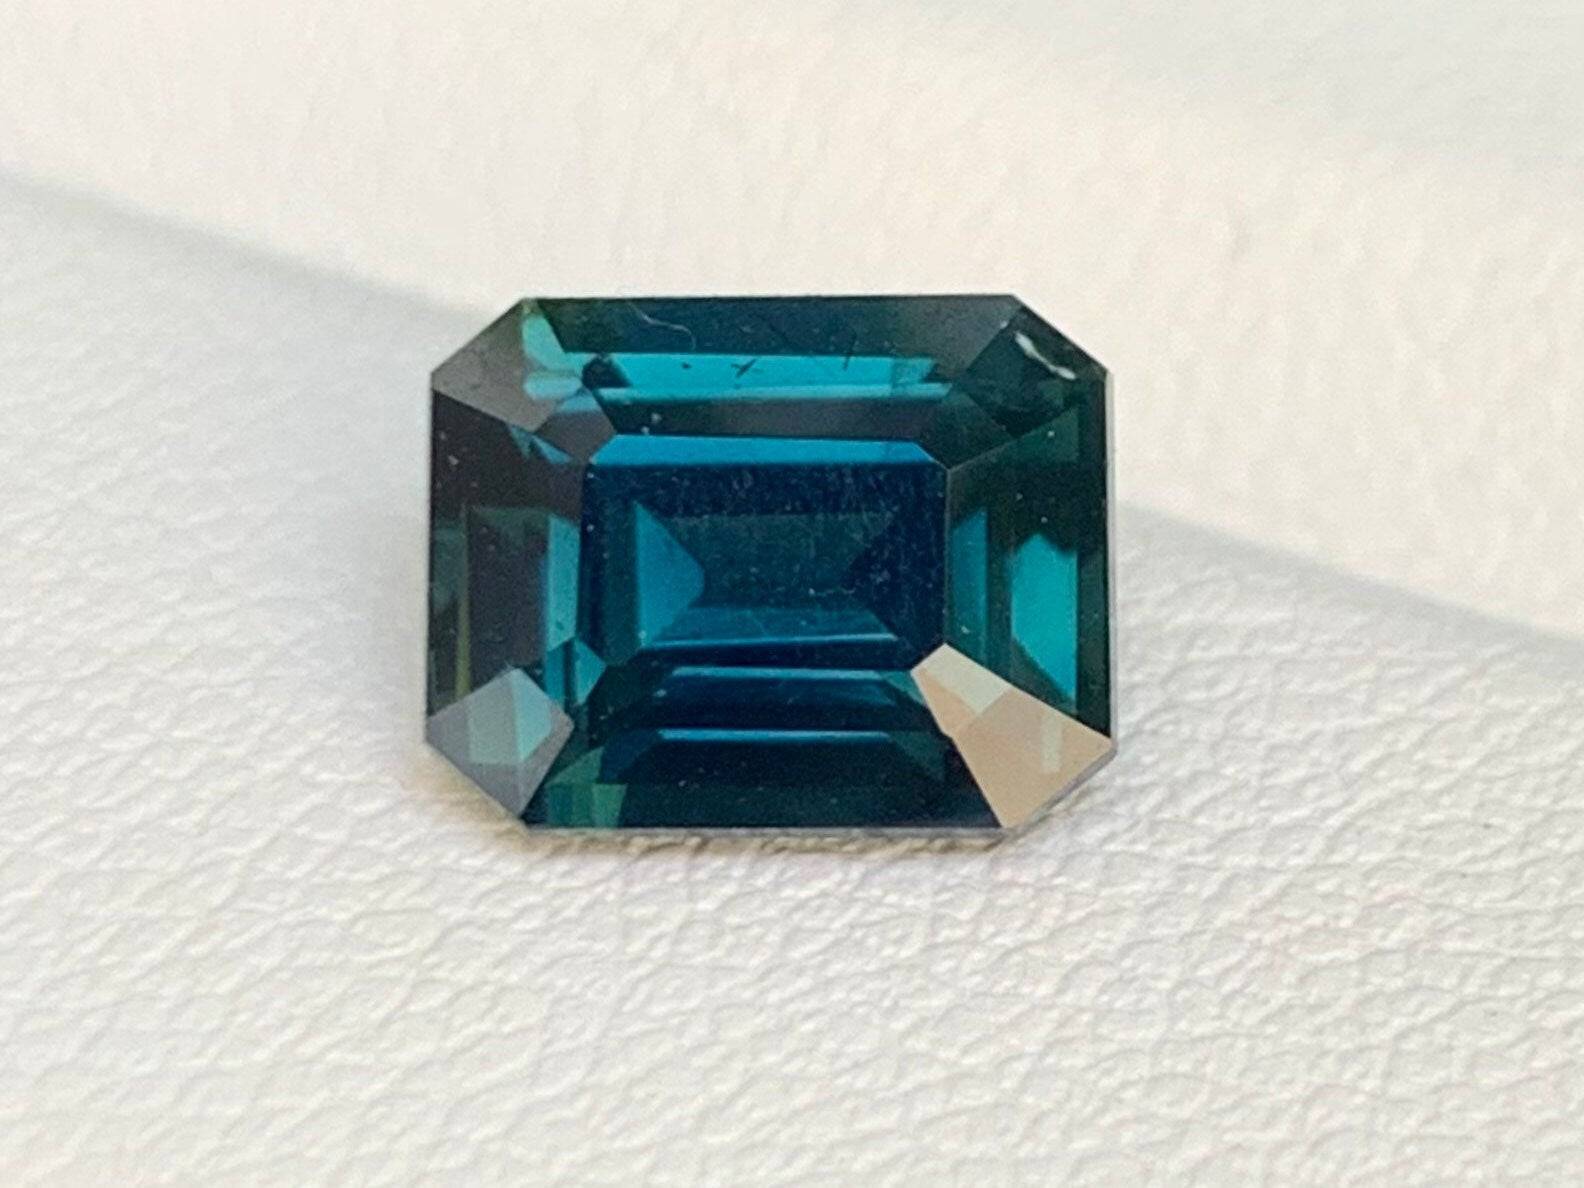 Unheated Peacock Teal Sapphire 2.51 Carats , Teal Sapphire Unheated Teal Sapphire Loose Gemstone , Gemstone for her , Gift for her - Baza Boutique 